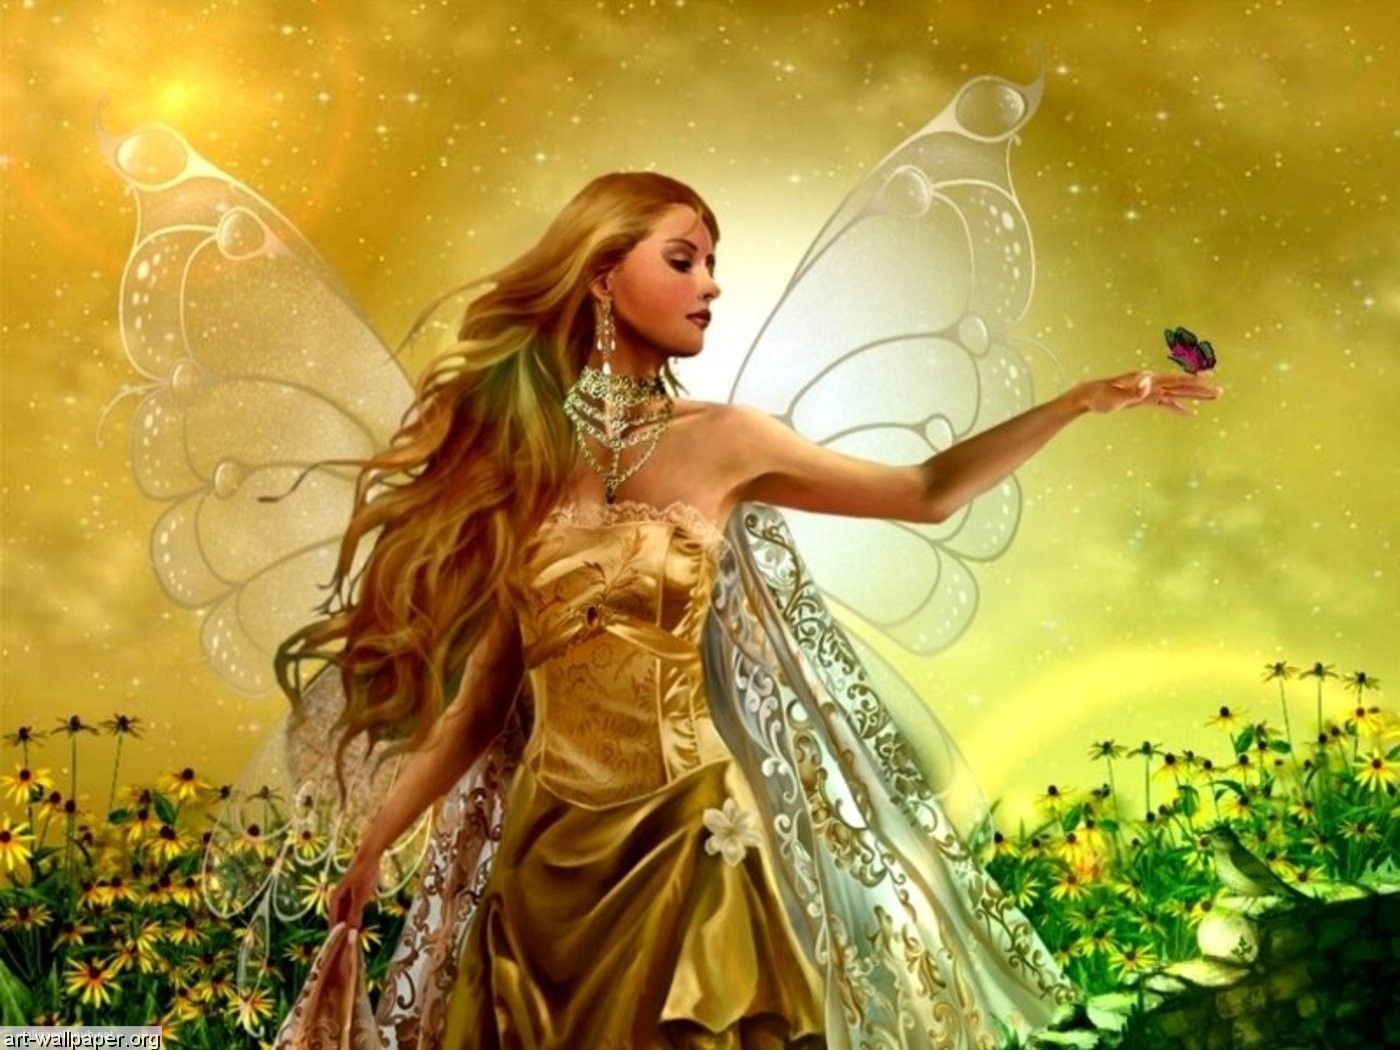 Pic > beautiful fairies and pixies wallpaper